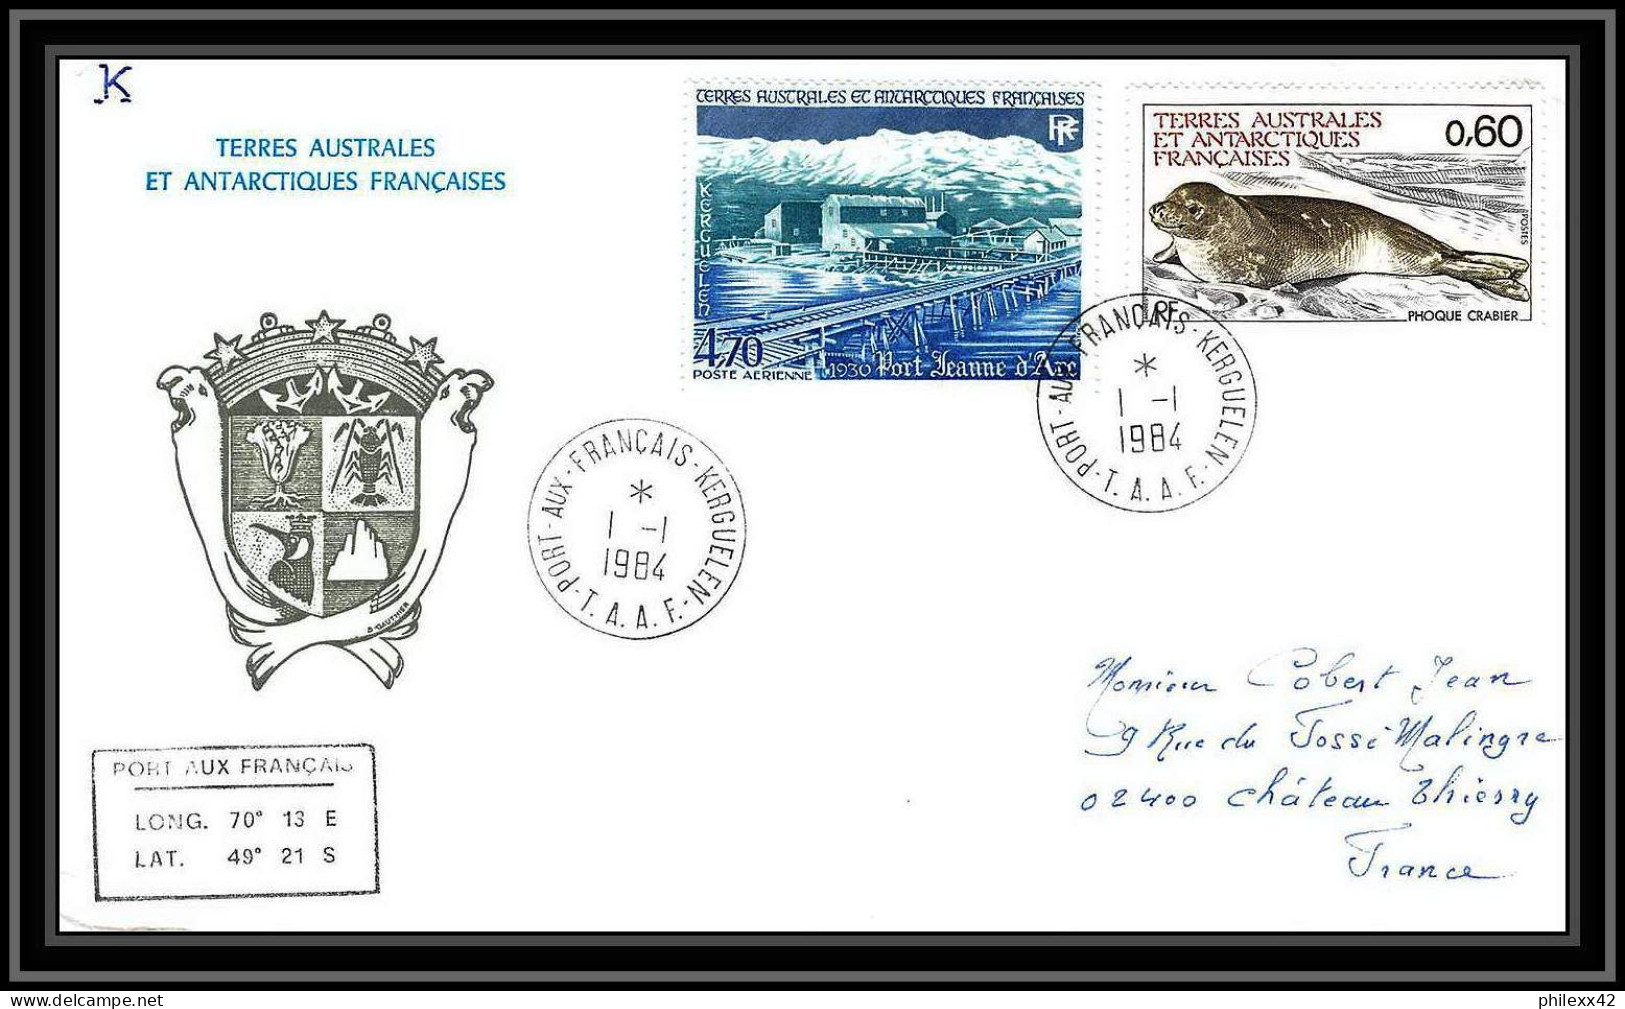 0208 Taaf Terres Australes Antarctic Lettre (cover) 01/01/1984 PA 80 PONT JEANNE D ARC - Covers & Documents